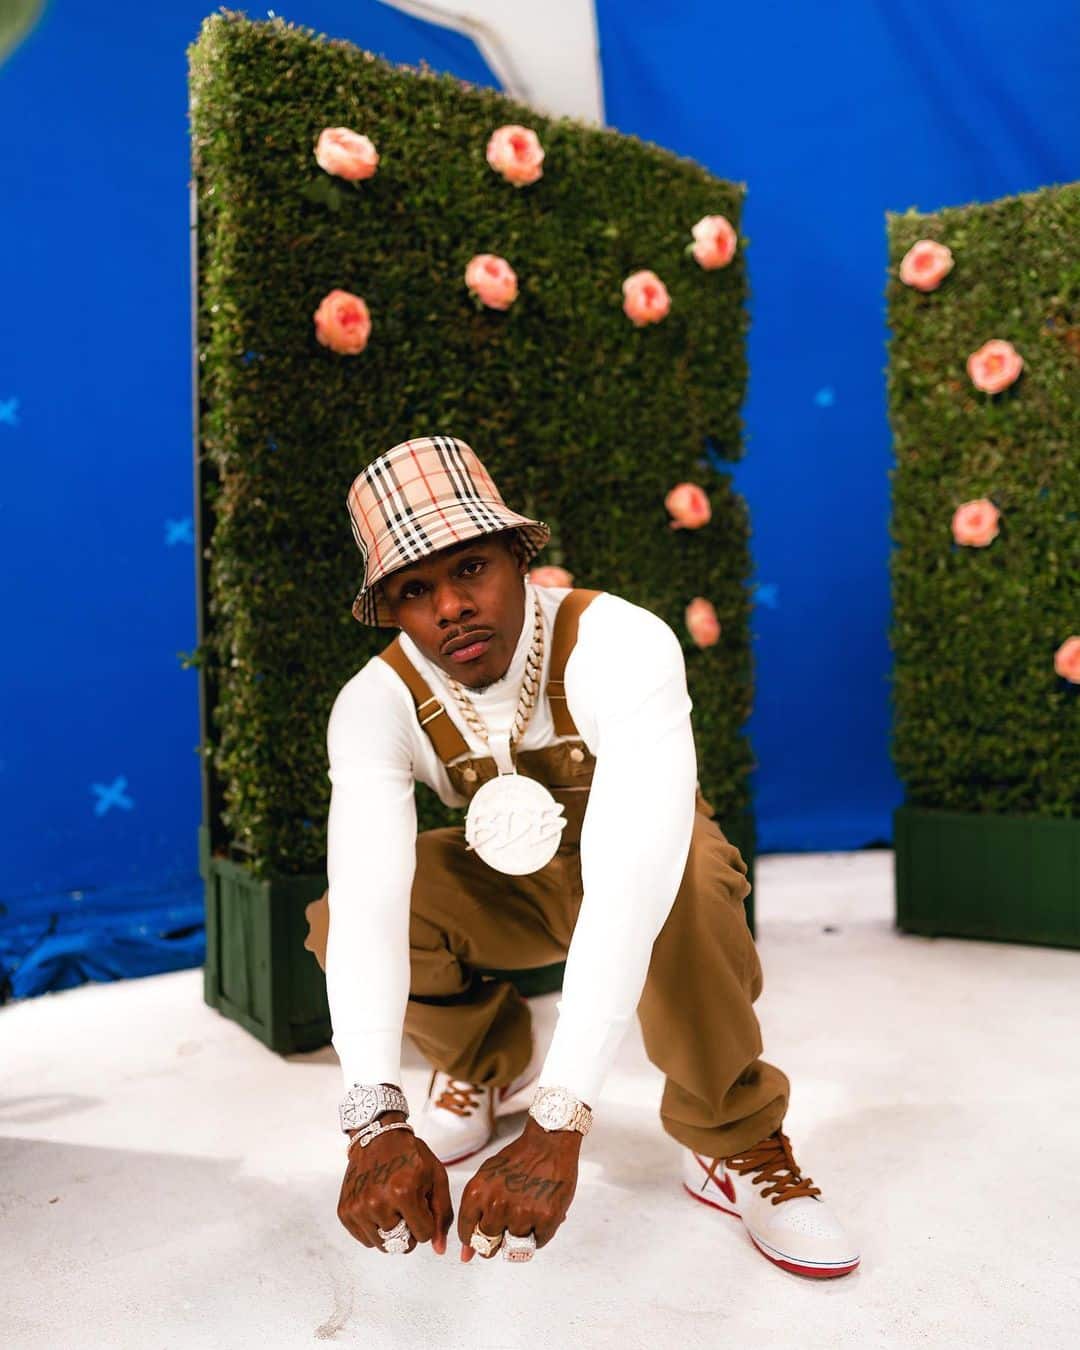 DaBaby - Biography, Profile, Facts, and Career